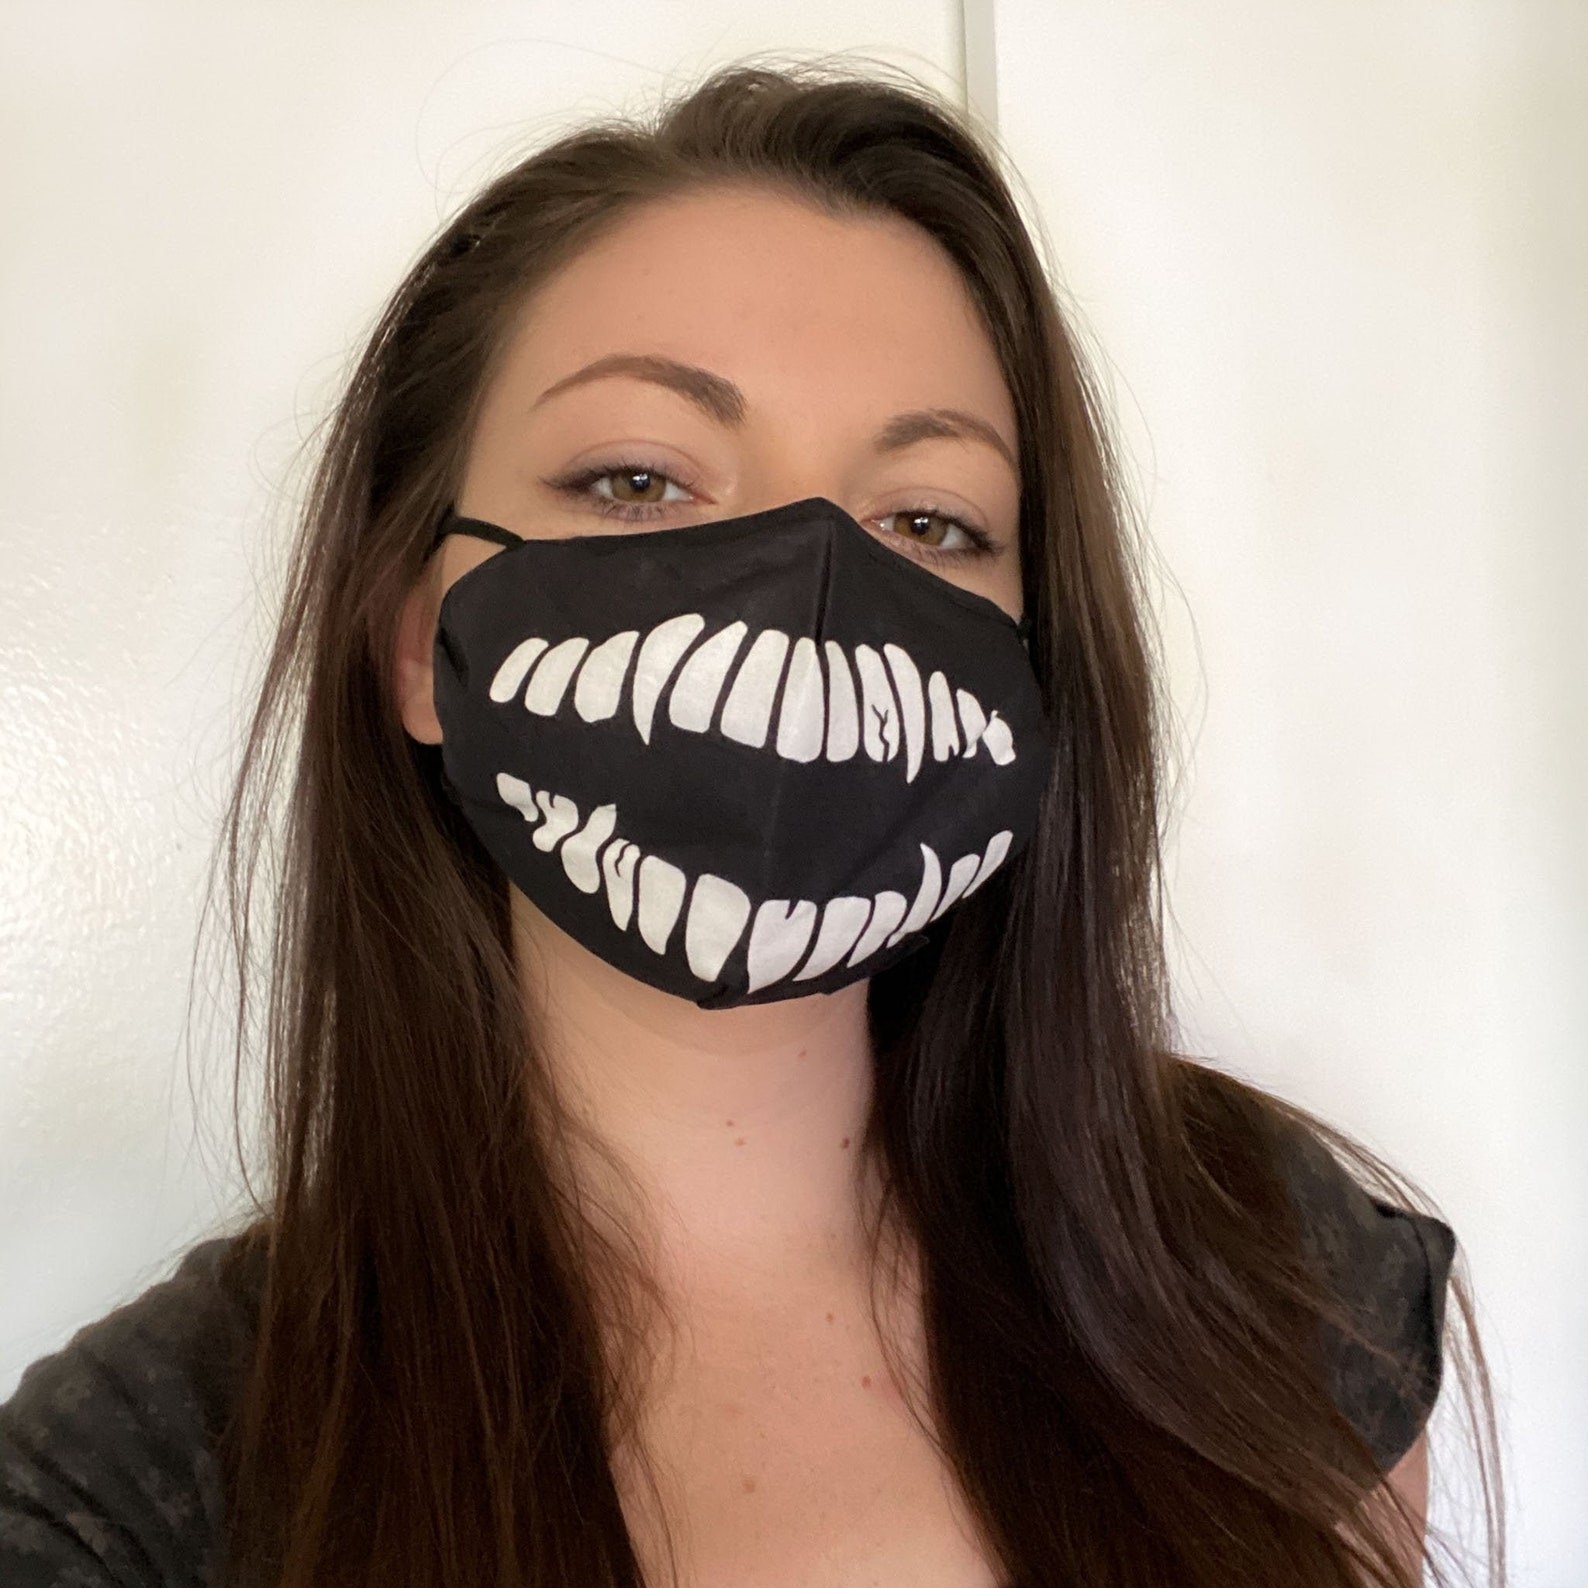 model wearing the black mask with white teeth on it